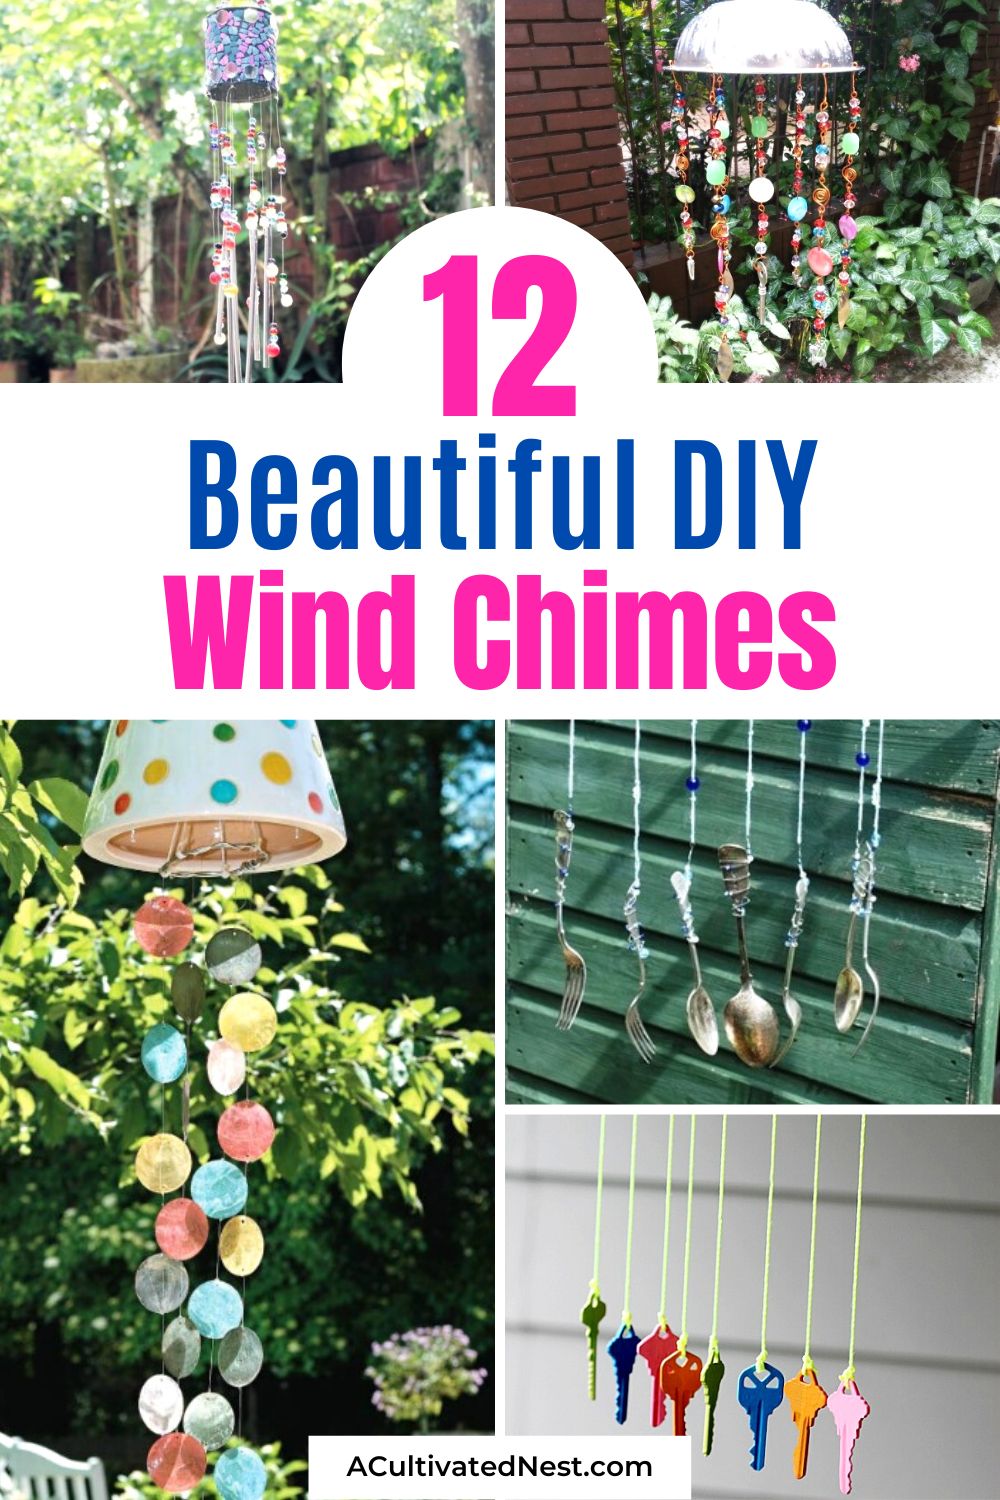 12 Great DIY Wind Chime Ideas- Unleash your creativity and craft stunning DIY wind chimes at home! Explore these imaginative DIY ideas that combine art and melody in perfect harmony. | #windChimes #crafts #OutdoorDecor #diyProjects #ACultivatedNest